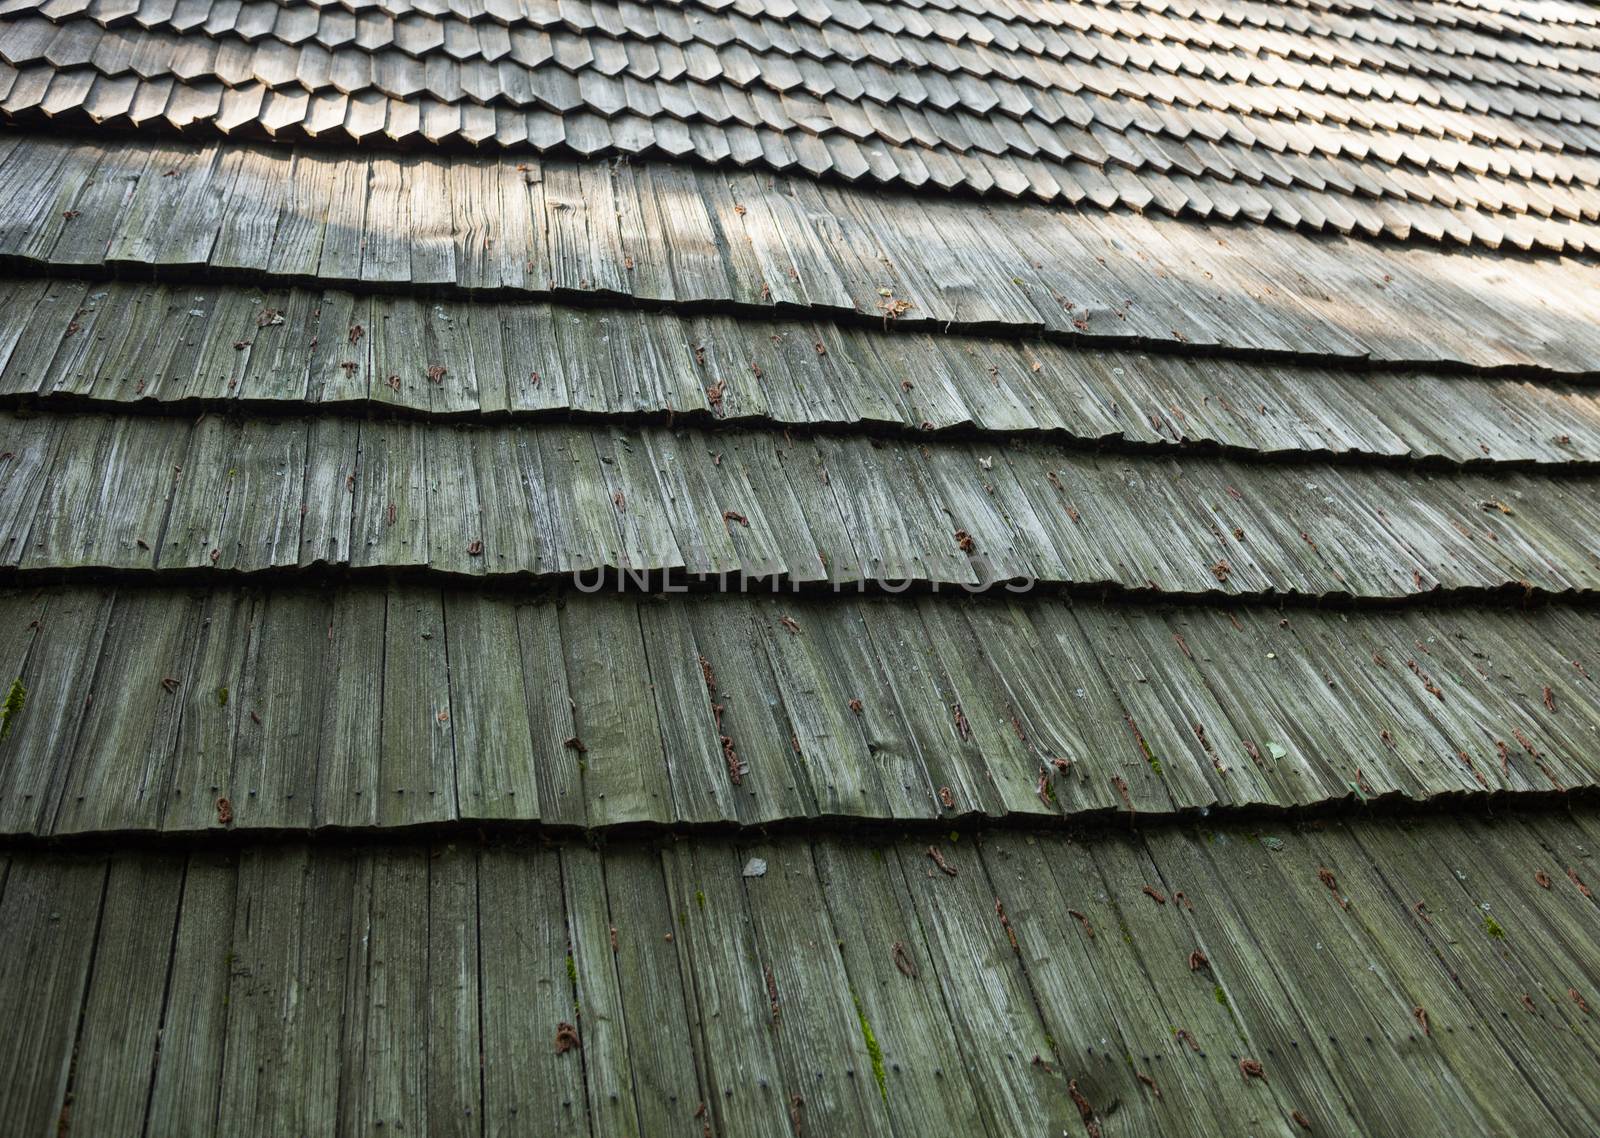 Old wooden shingle roof. Wooden surface texture.